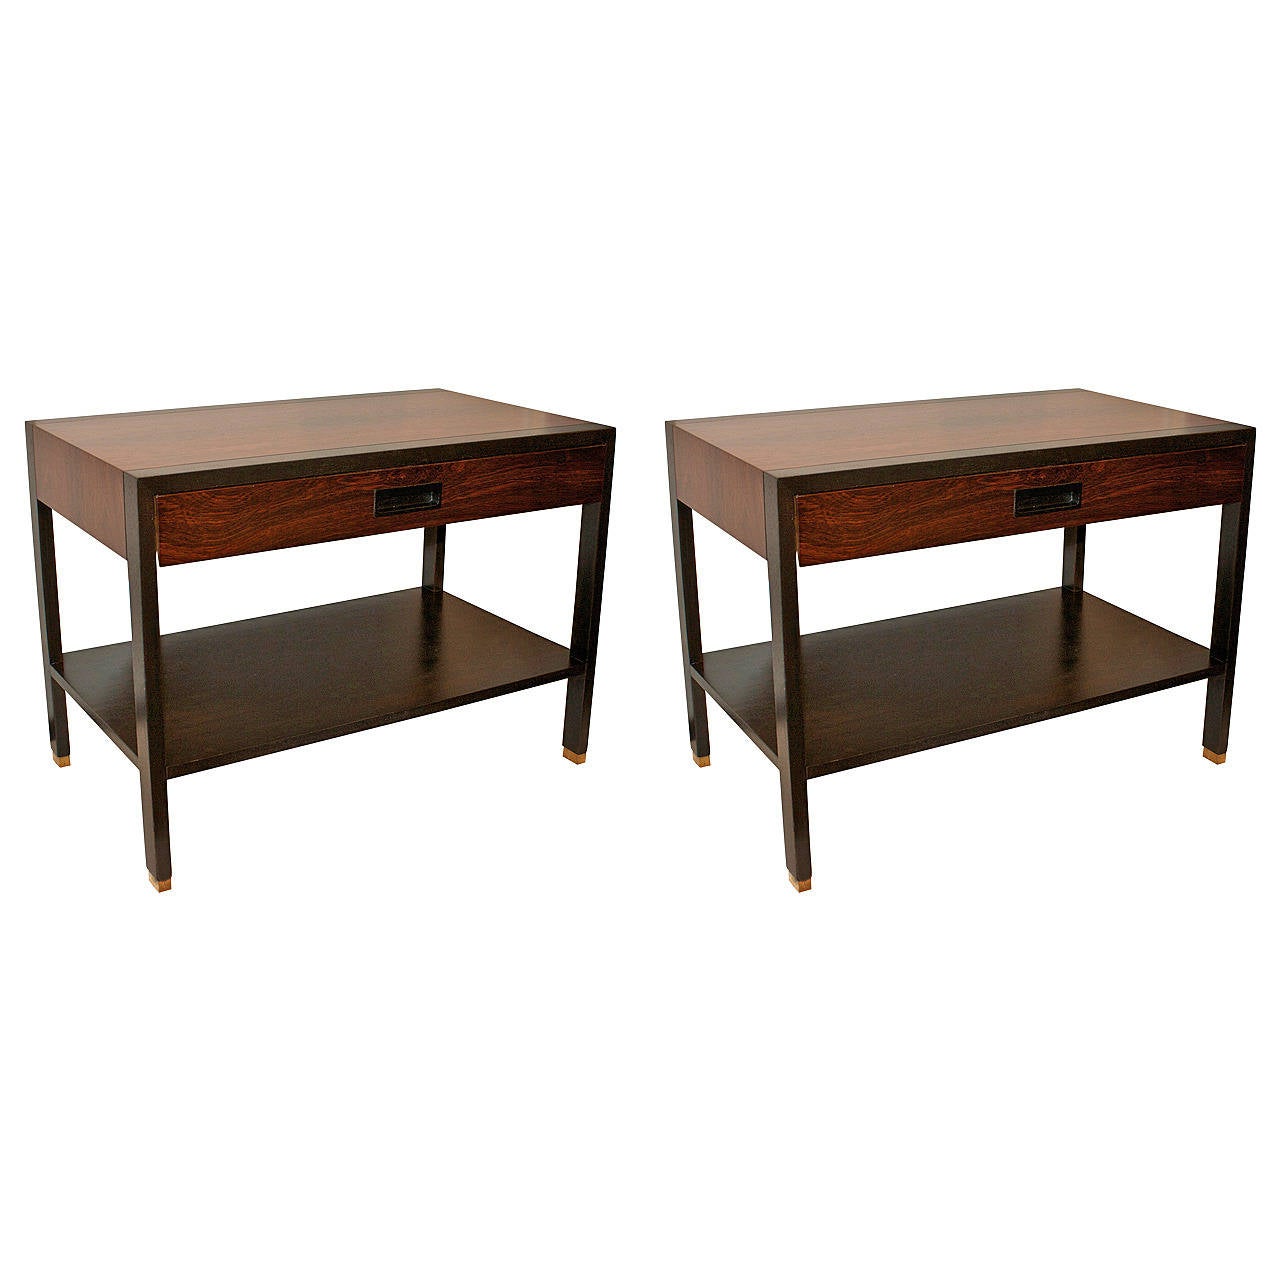 Two-tone side tables by Harvey Probber. The top is walnut with a rosewood bottom tier, frame and handle; the legs have brass accents. Signed.